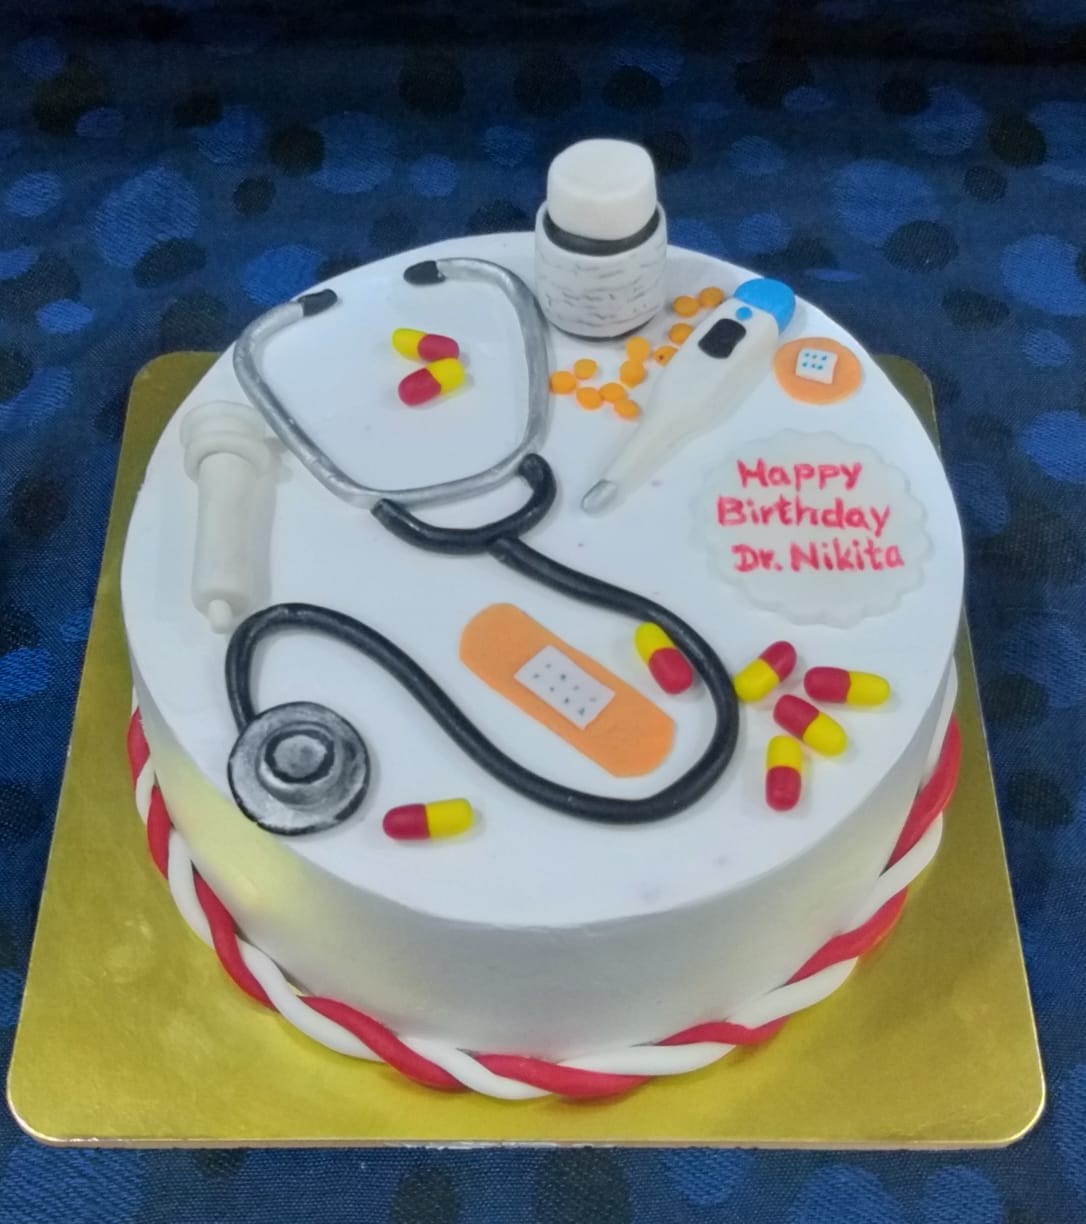 1 KG Doctor Theme Cake in Tejas Daffodils, 11th Cross Road, Gangappa Layout, Pai Layout, Mahadevapura, Bangalore  | Delivery Date: 24 September 2022 Designs, Images, Price Near Me